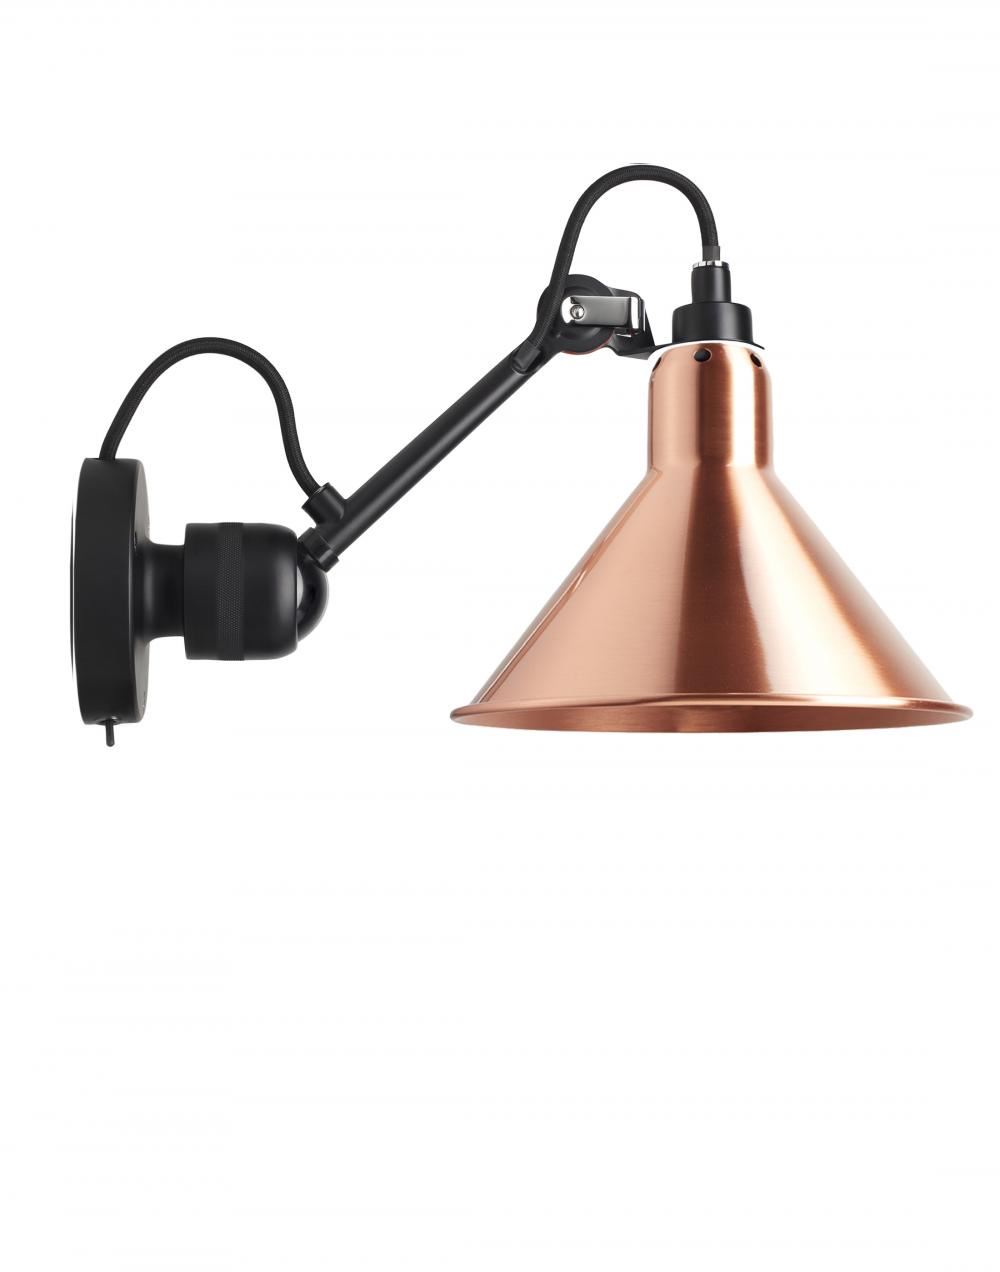 Lampe Gras 304 Small Wall Light Black Arm Copper Shade With White Interior Conic Integral Switch